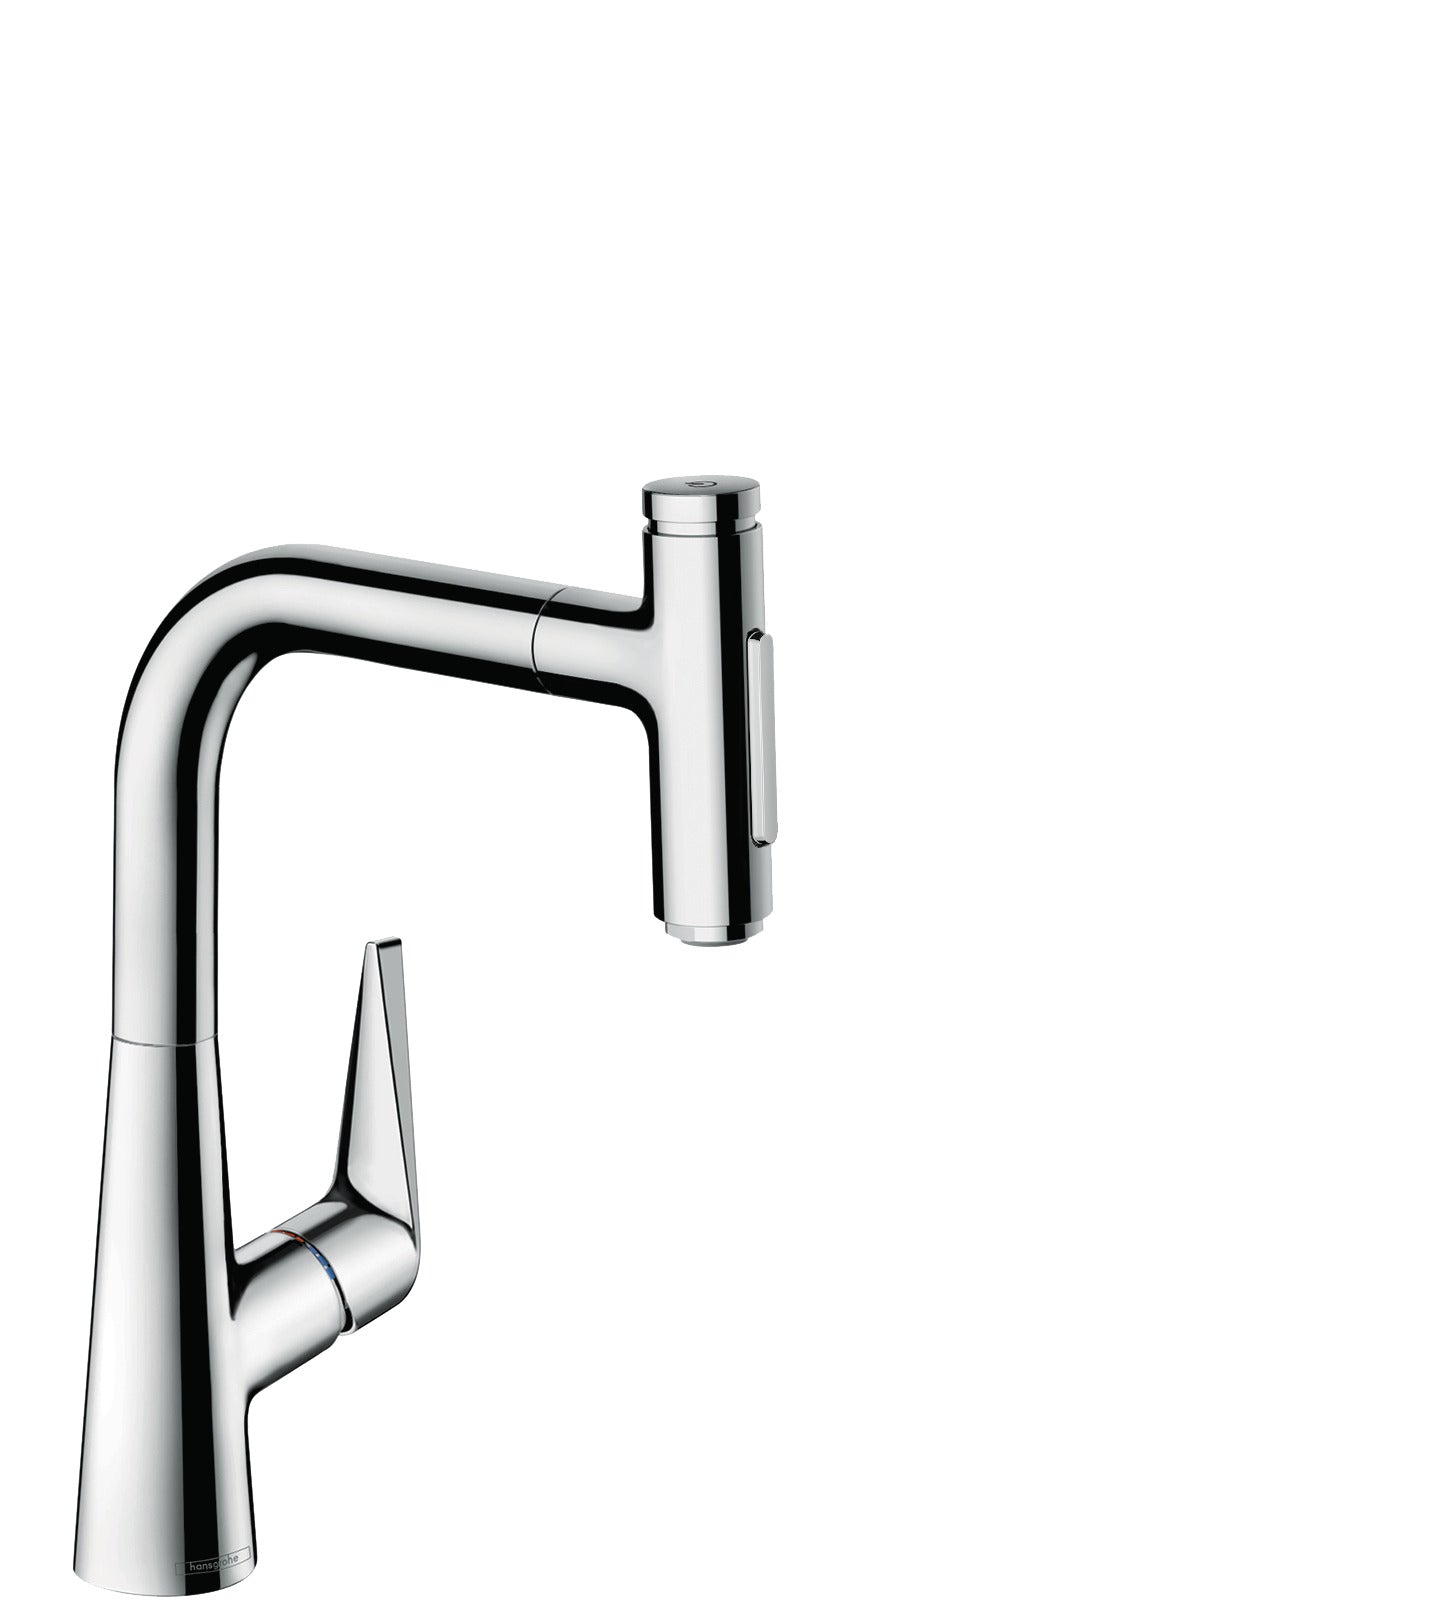 HANSGROHE 73868001 Chrome Talis Select S Modern Kitchen Faucet 1.75 GPM